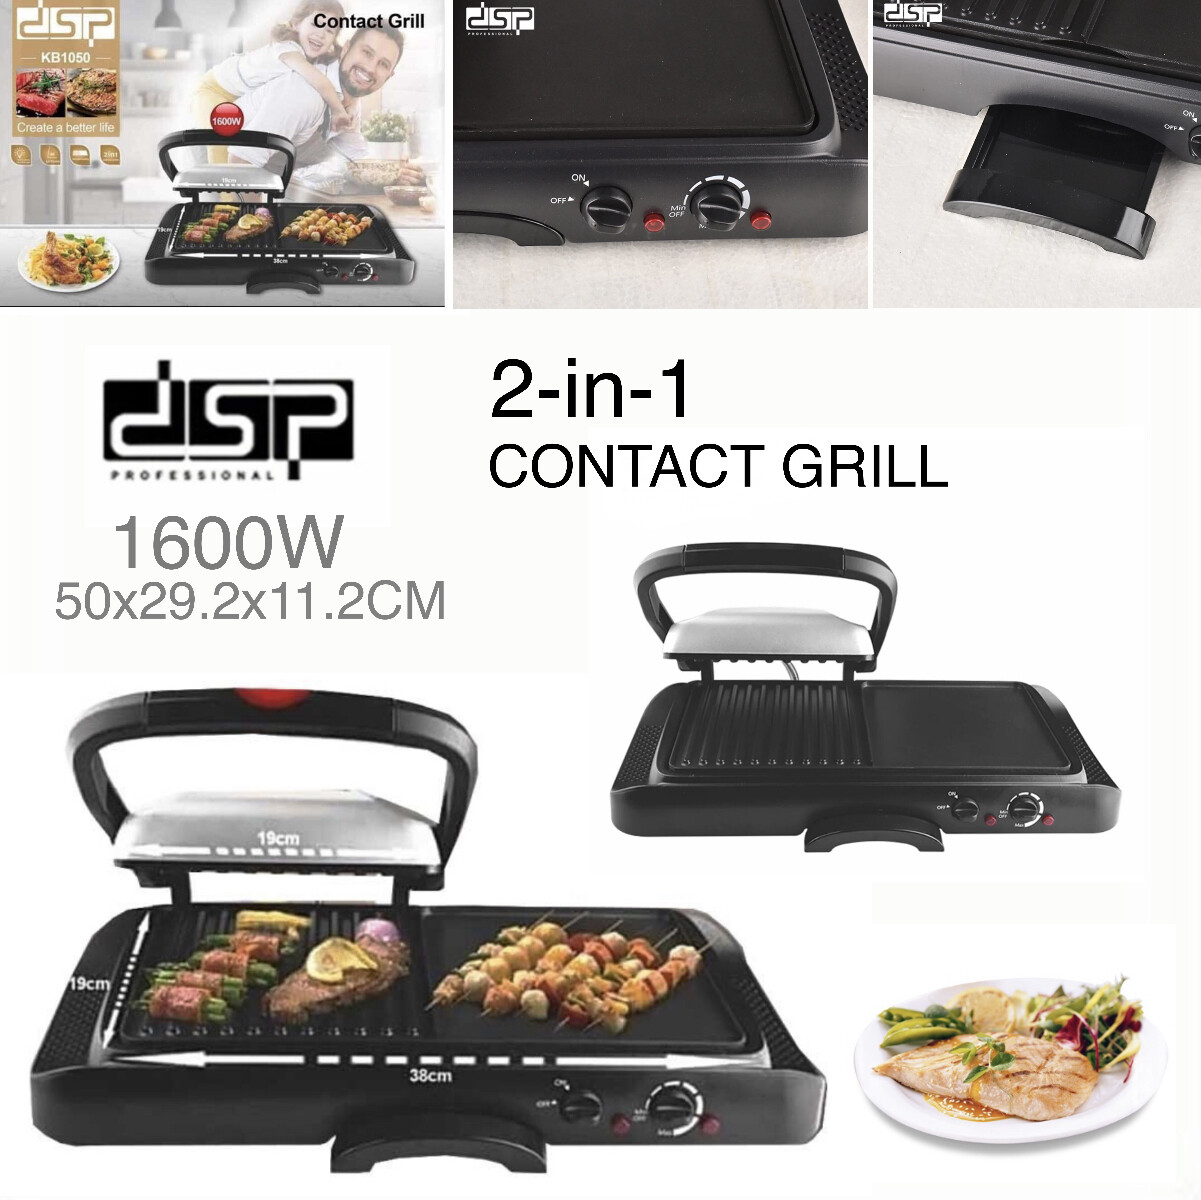 2-in-1 Contact Grill